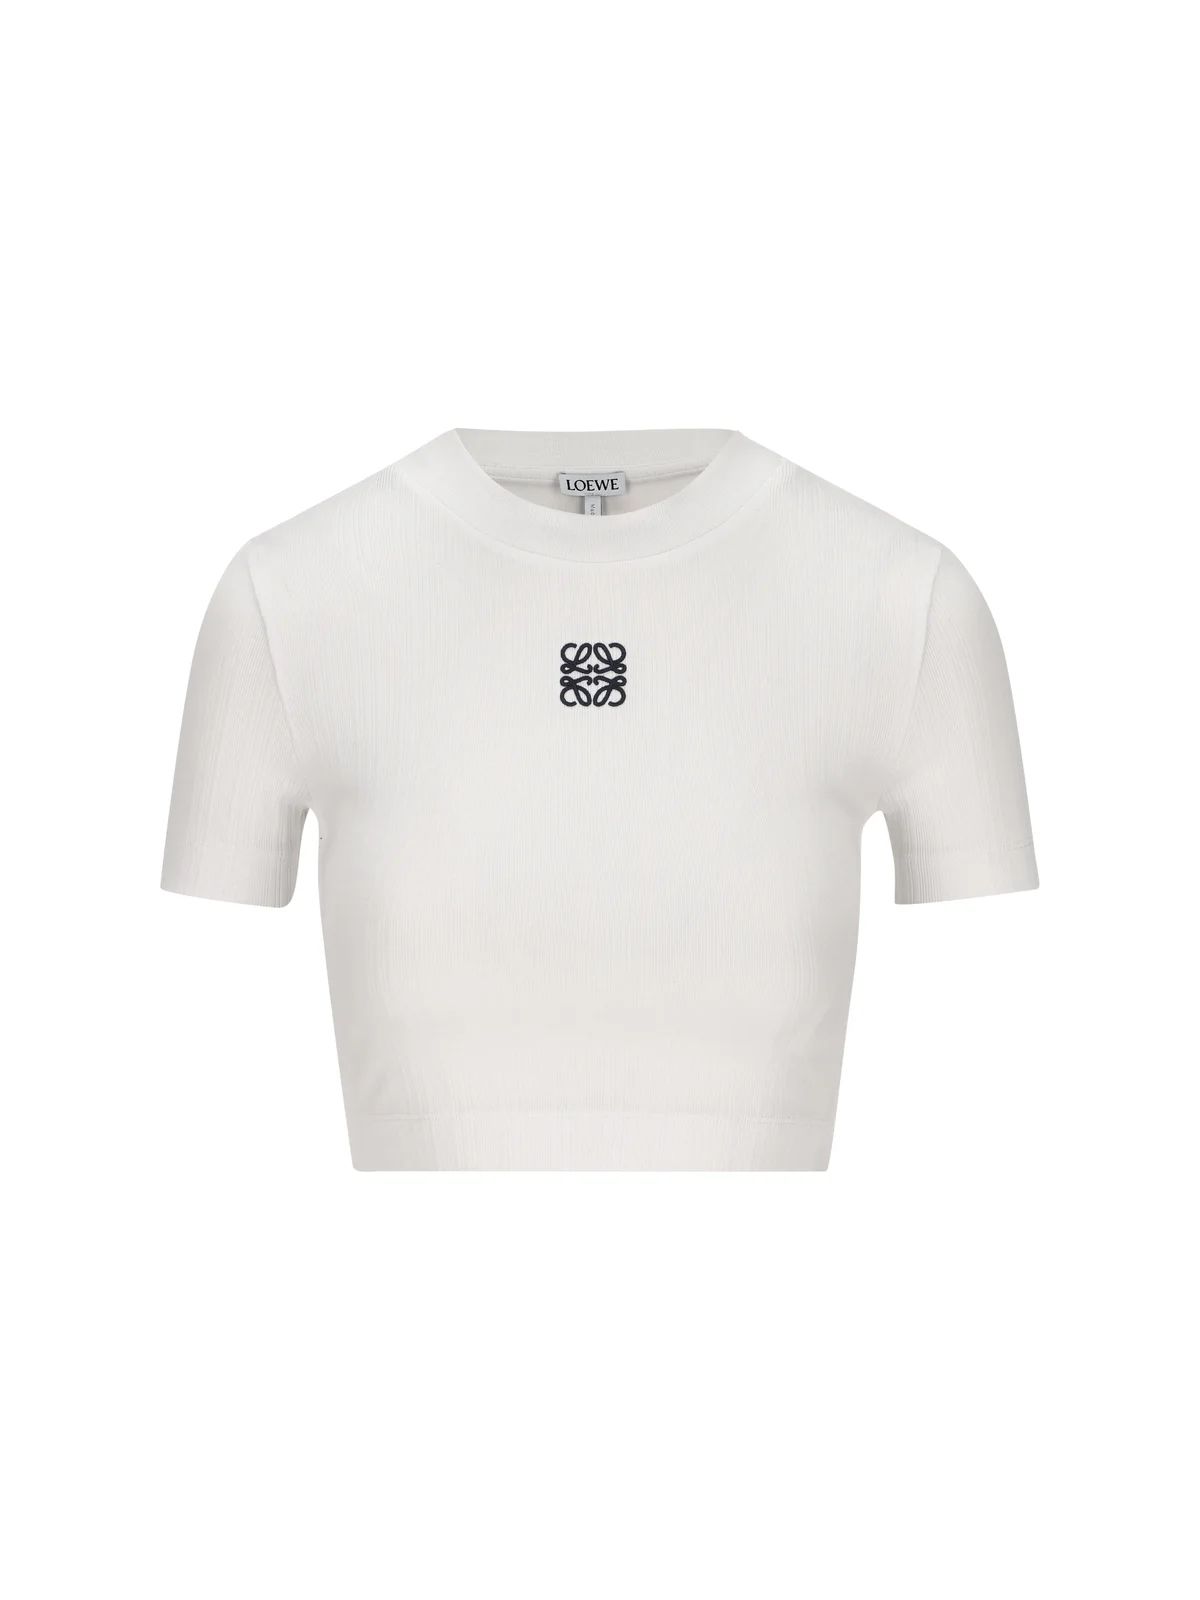 Loewe Logo Embroidered Cropped Top | Cettire Global